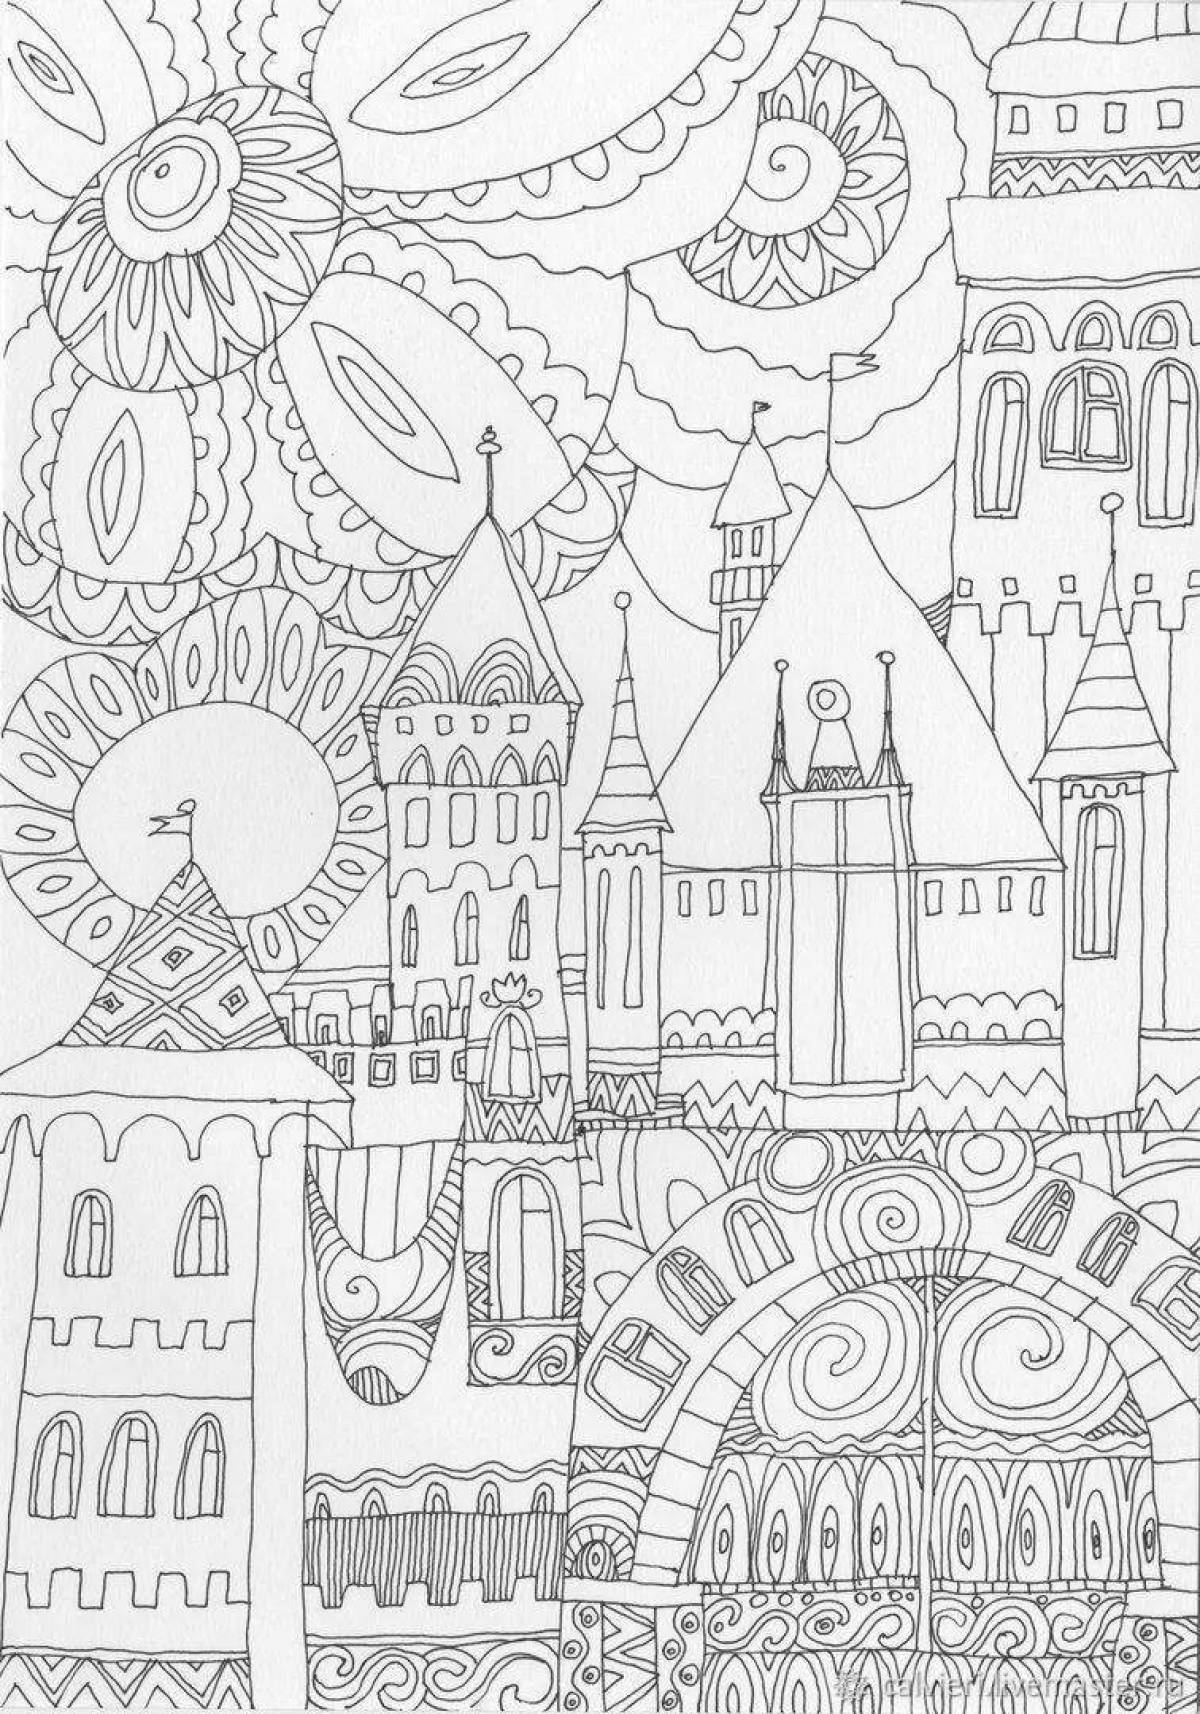 Luminous stress reliever read city coloring book